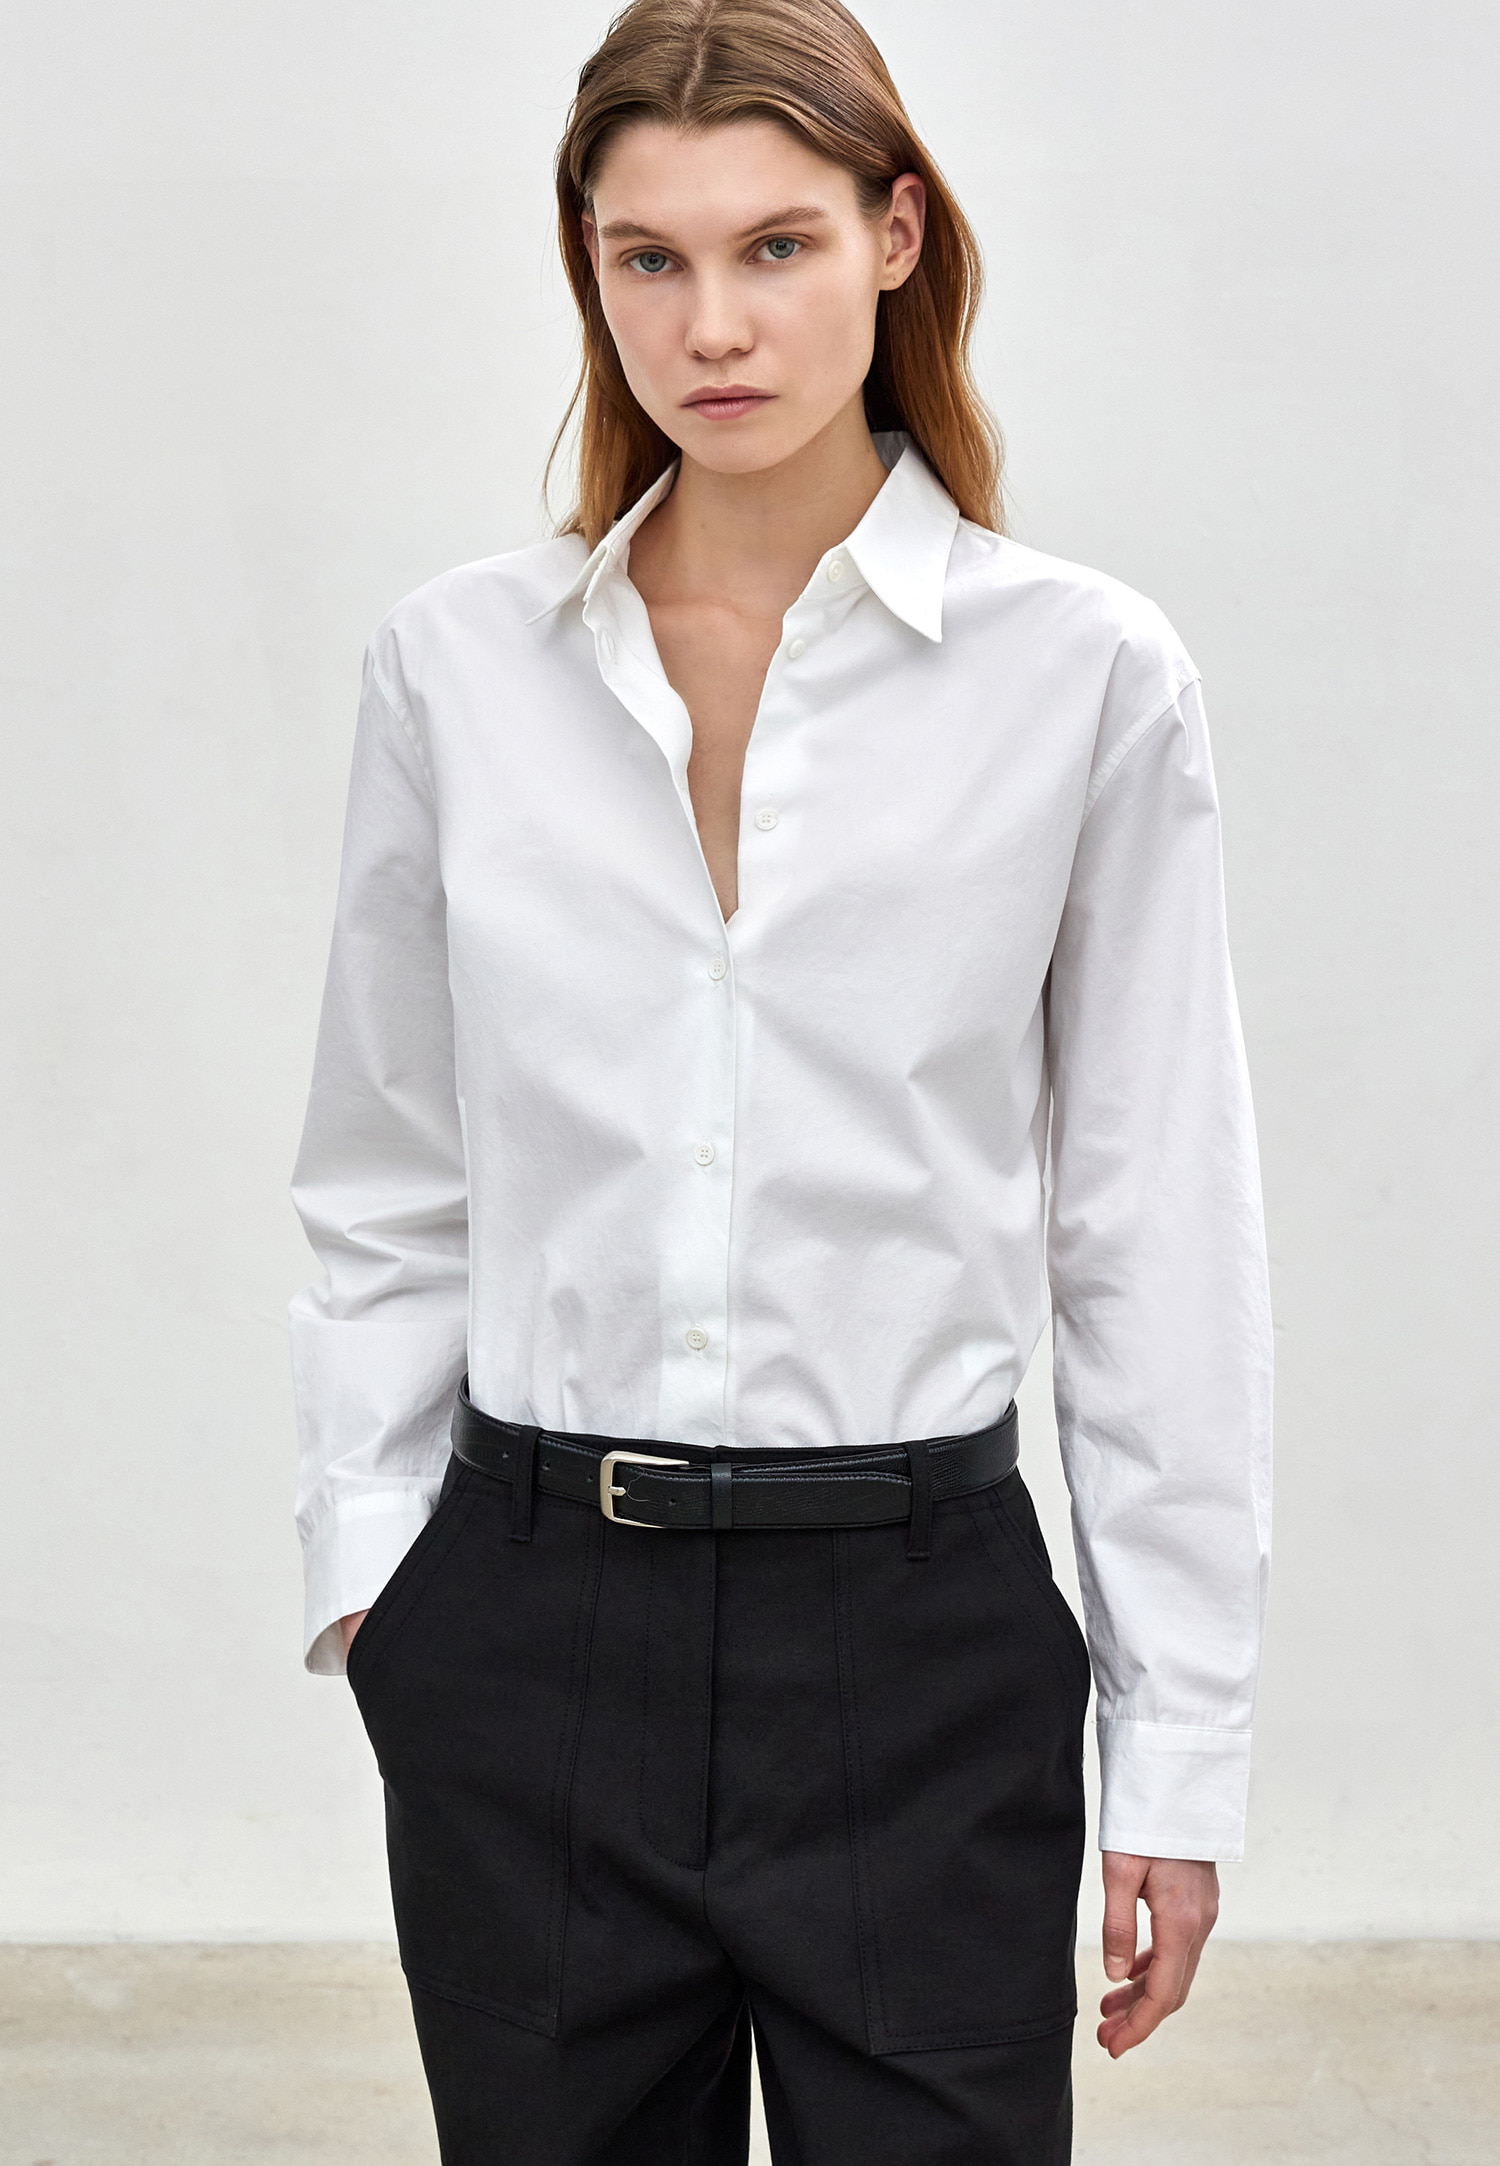 POINTED COLLAR SHIRTS - WHITE